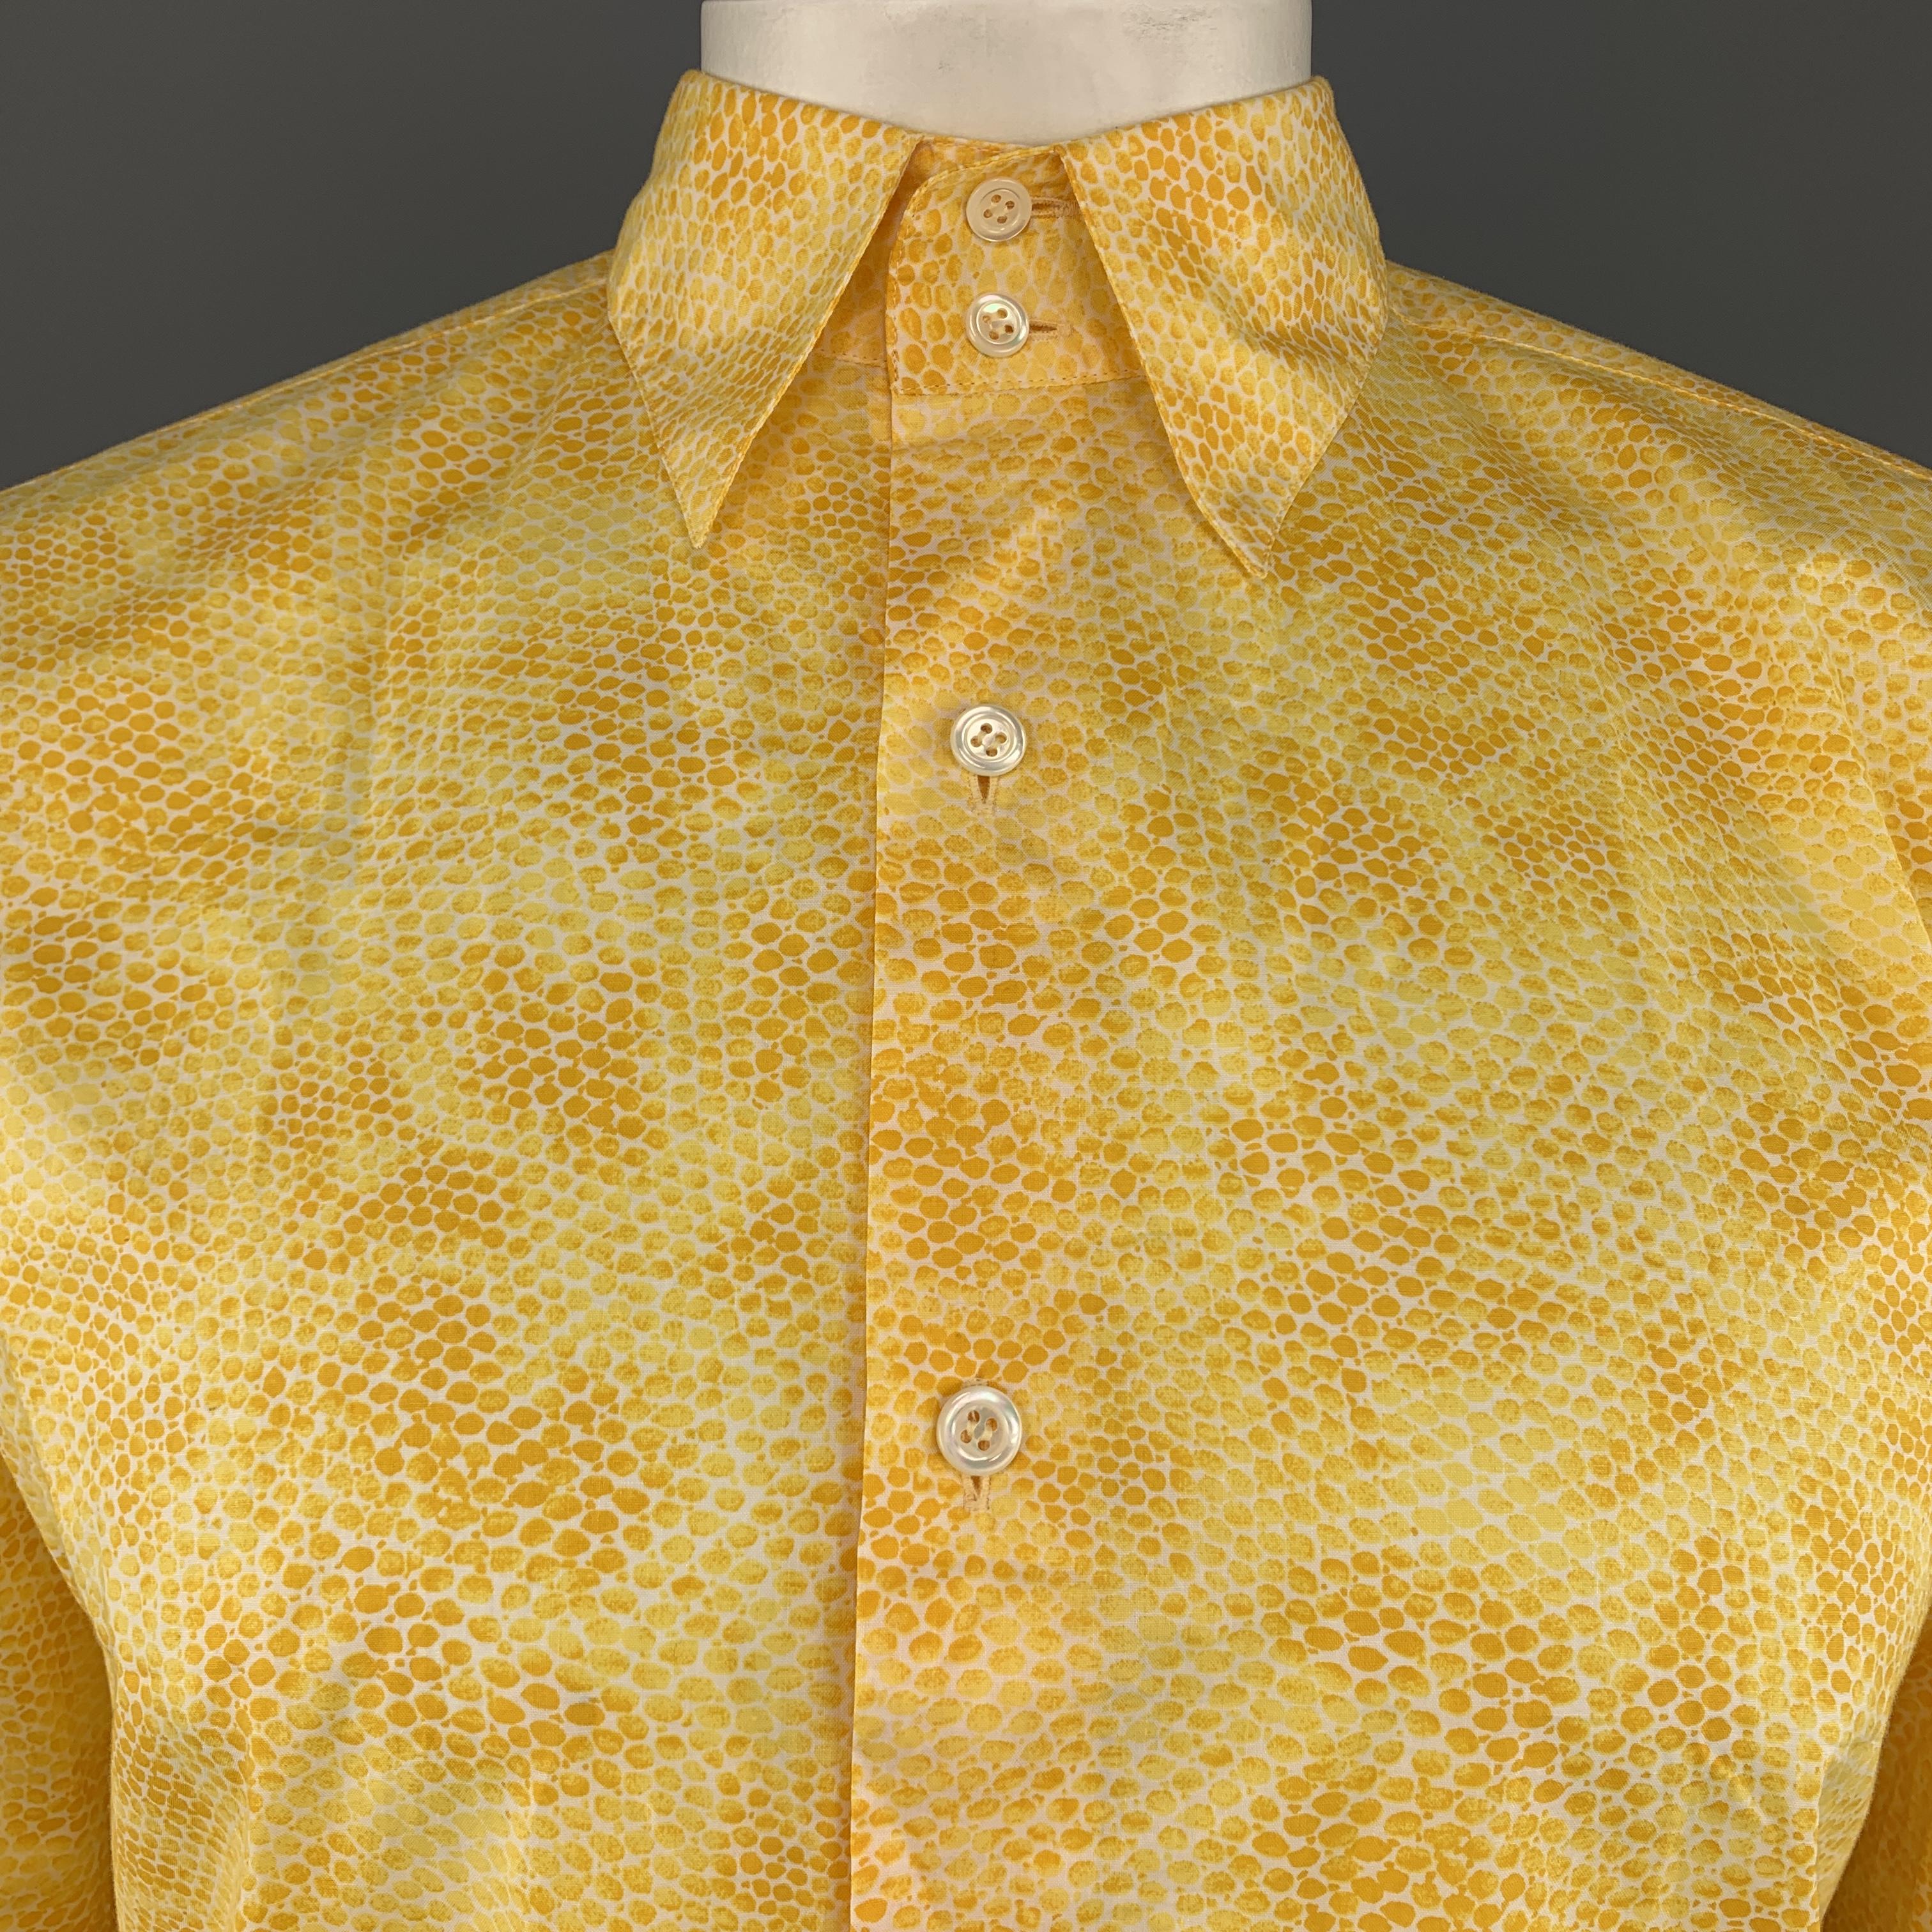 AGNES B. Homme shirt comes in light weight, textured cotton with an all over snakeskin print with a two button pointed collar. Made in France.
 

Excellent Pre-Owned Condition.
Marked: 42

Measurements:

Shoulder: 16.5 in.
Chest: 44 in.
Sleeve: 26.5